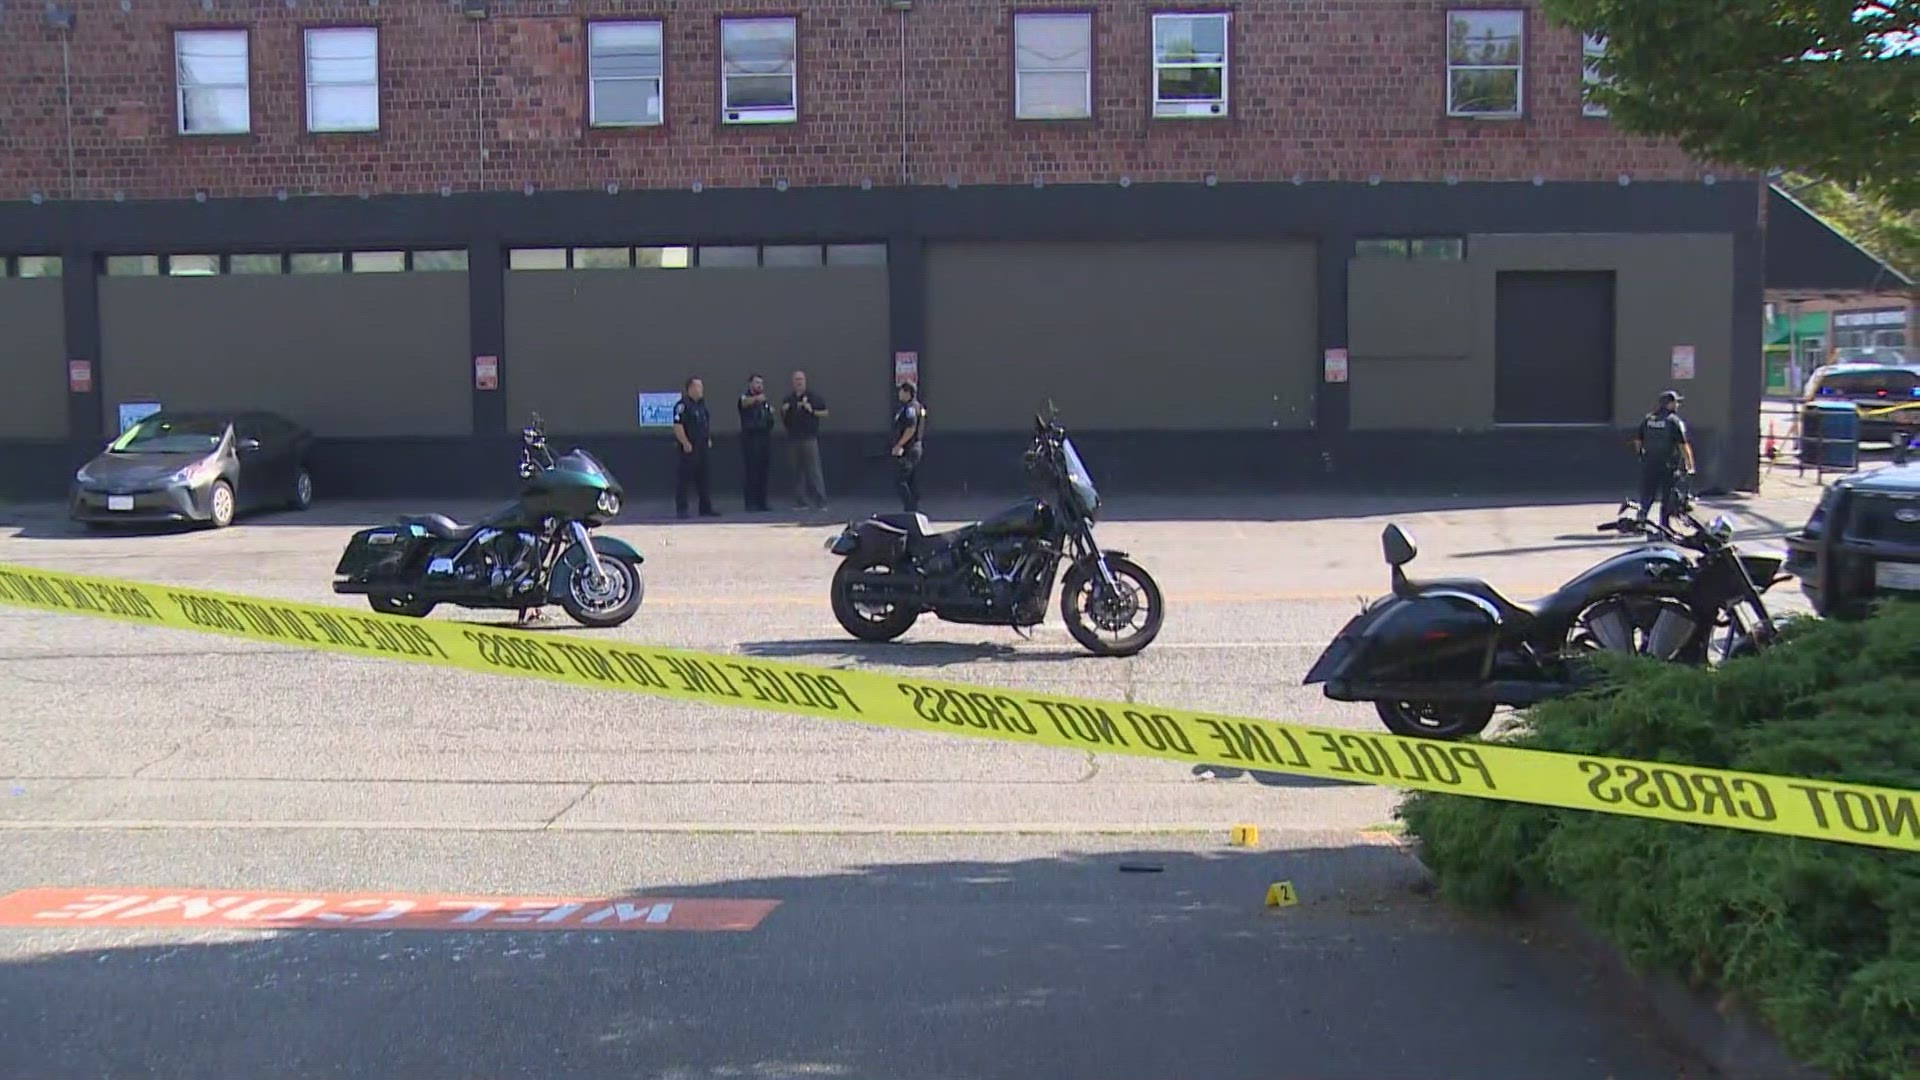 Police say one person has been arrested and one person is receiving medical care after the fight between three bikers ended in a shooting.